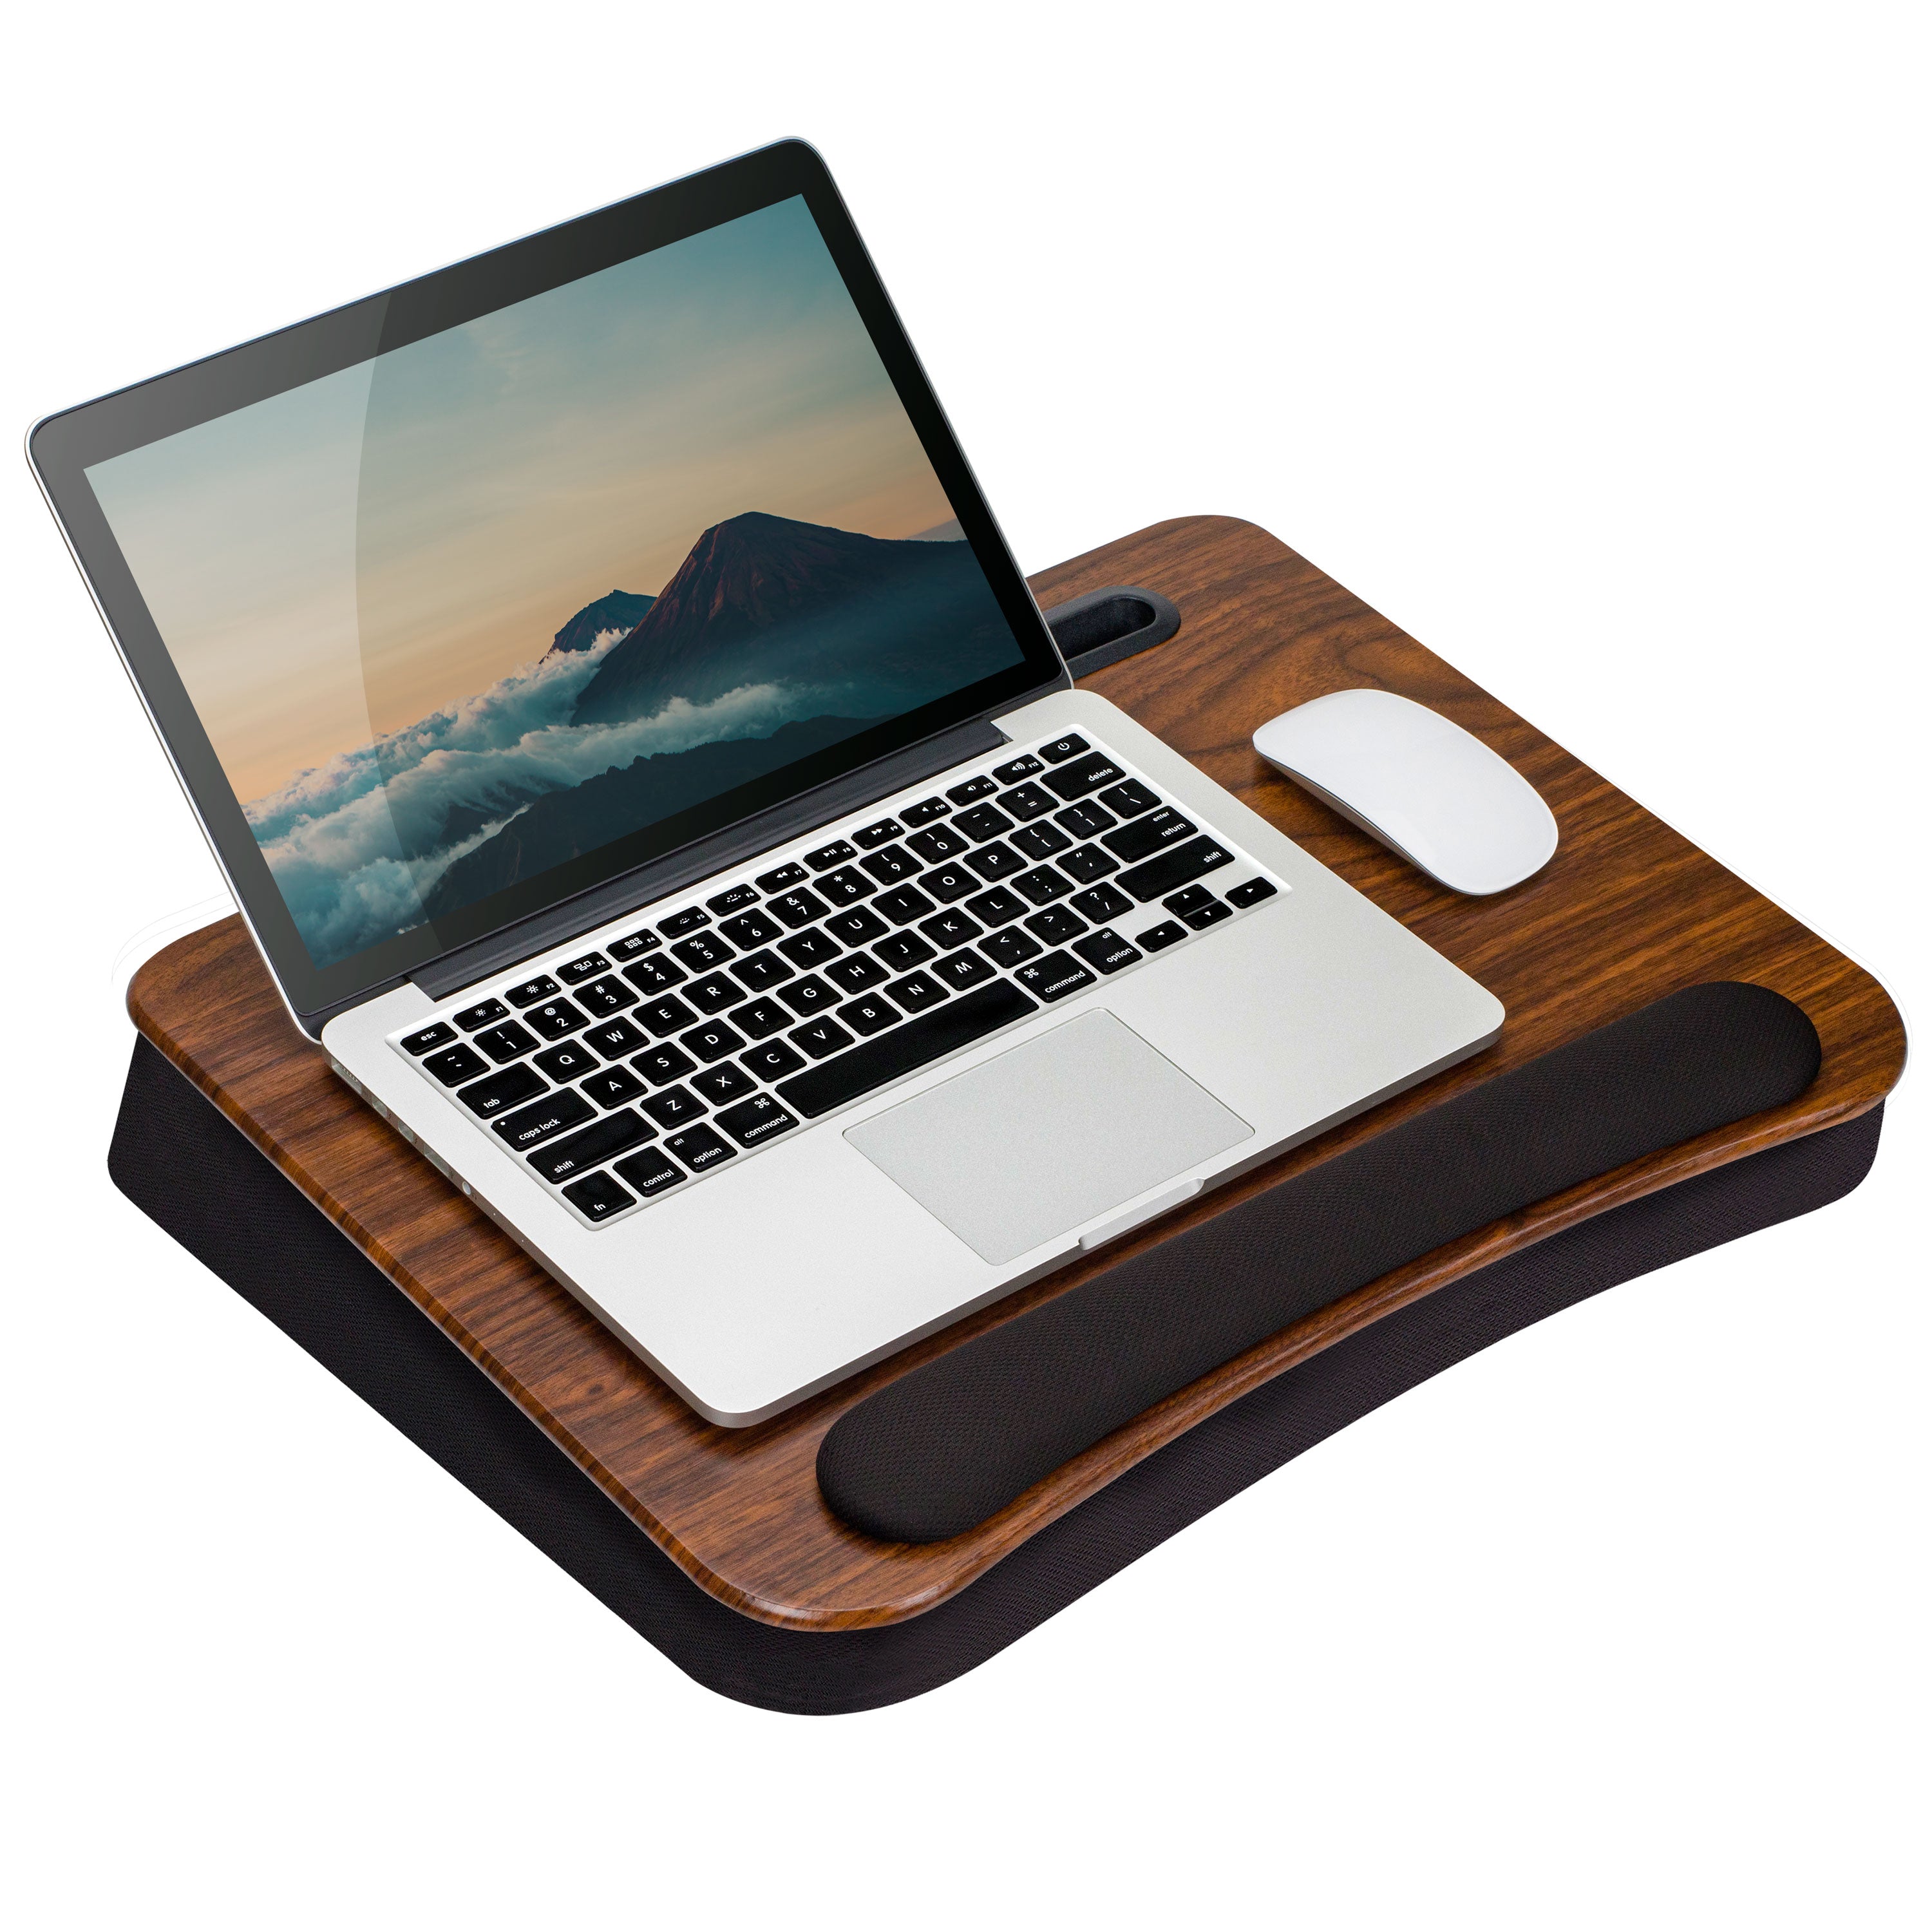  Large Lap Laptop Desk - Portable LapDesk with Mouse Pad & Wrist  Rest for Notebook, MacBook, Tablet, Bed, Sofa, Working, Writing,  Drawing(Wood Black, Fit Up to 17.3-in Laptops) : Office Products